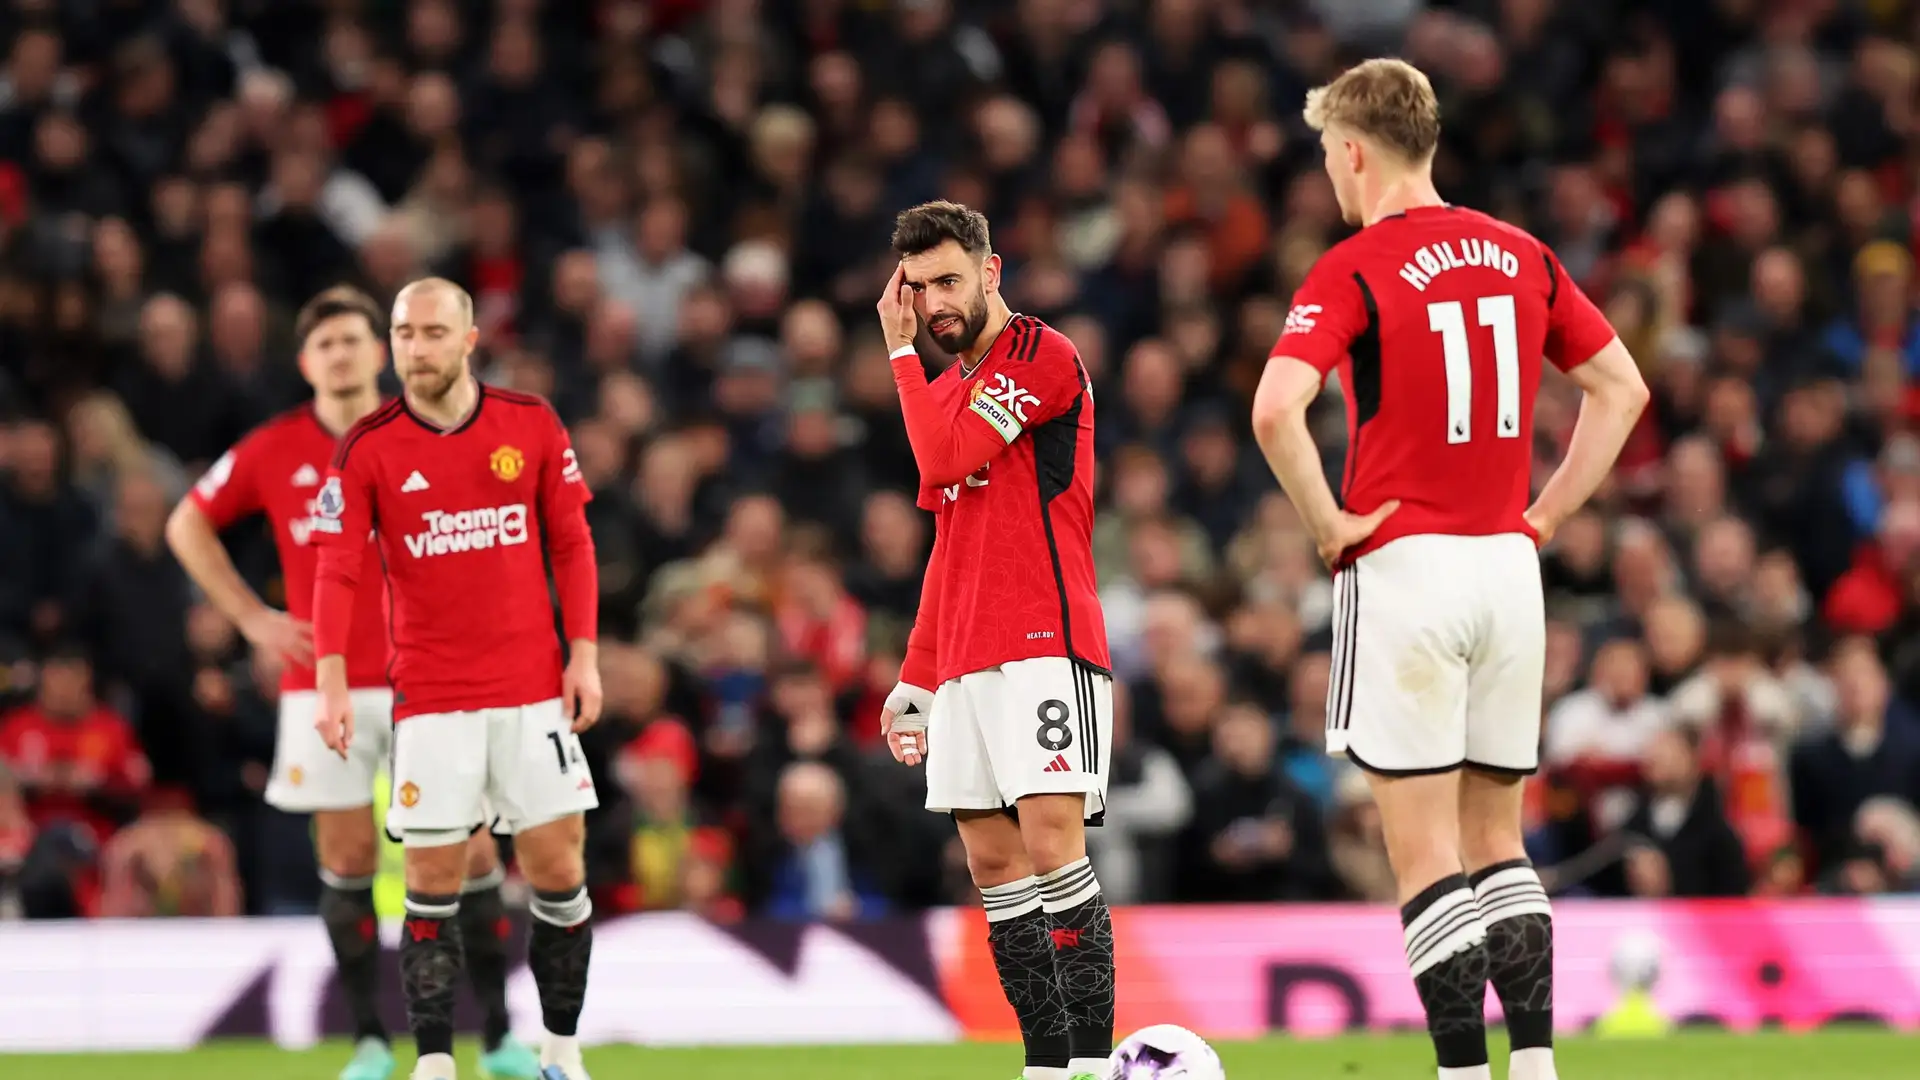 Man Utd take damning decision on end-of-season awards dinner amid another miserable campaign under Erik ten Hag